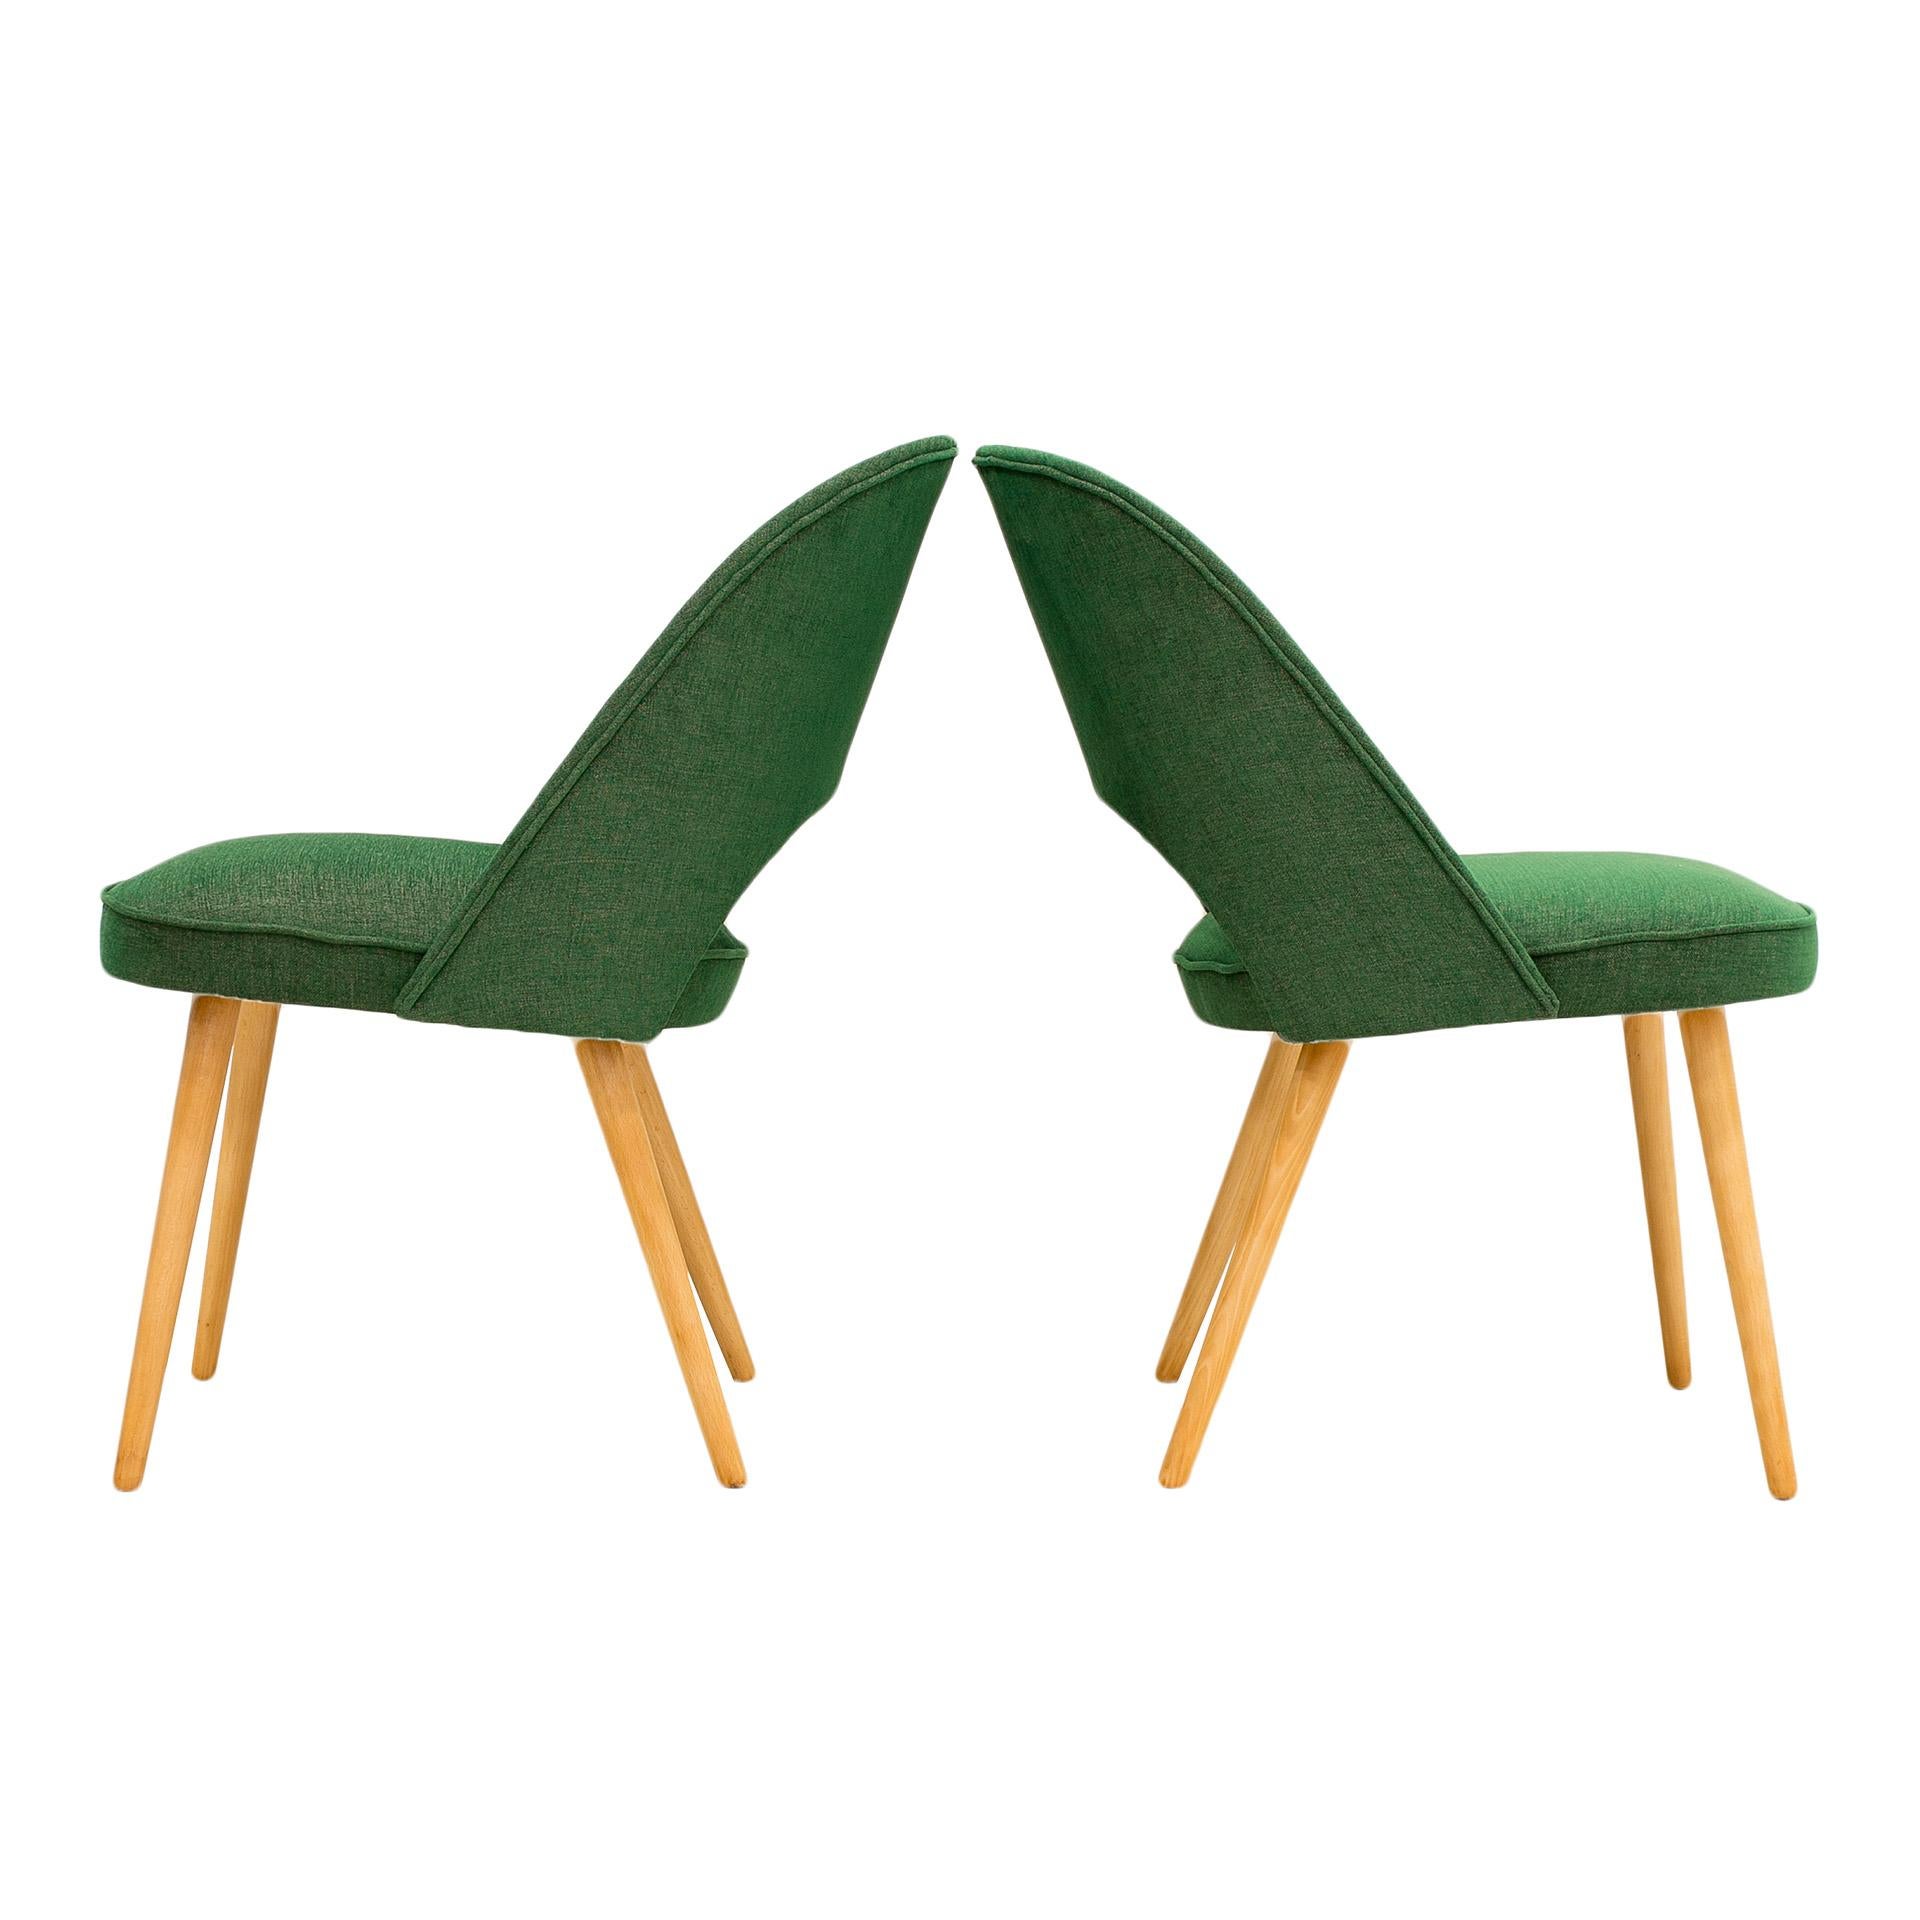 1960s Thonet Chairs, Reupholstered in Juicy Green Fabric, Set of 2 1